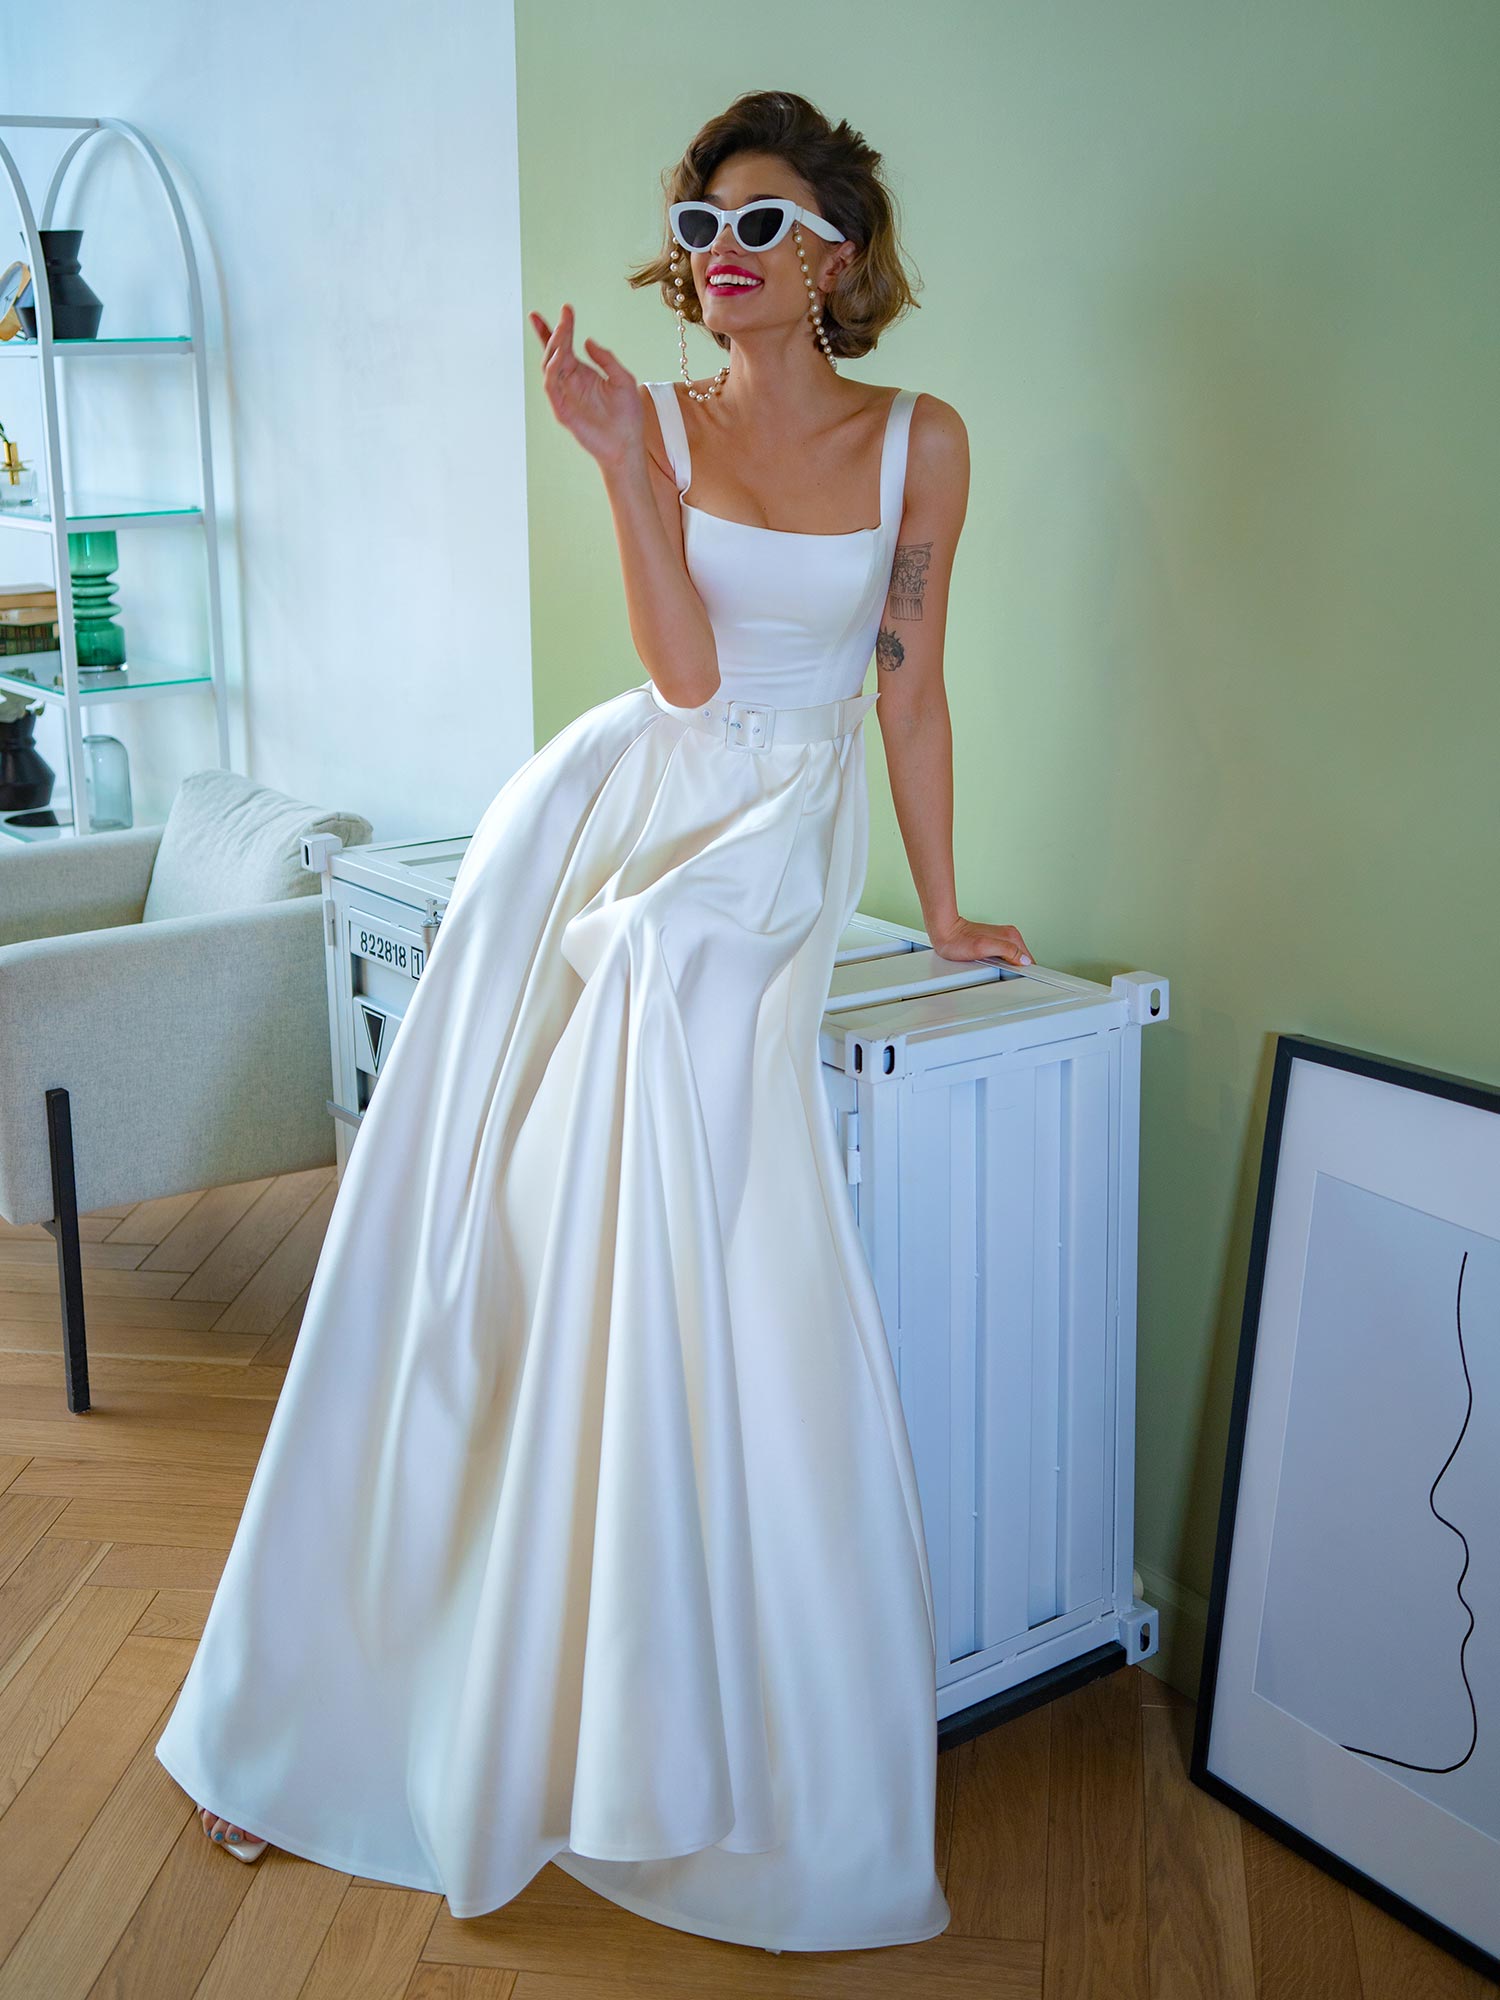 Style #2209-1, satin ball gown wedding dress with square neckline and belt, available in ivory